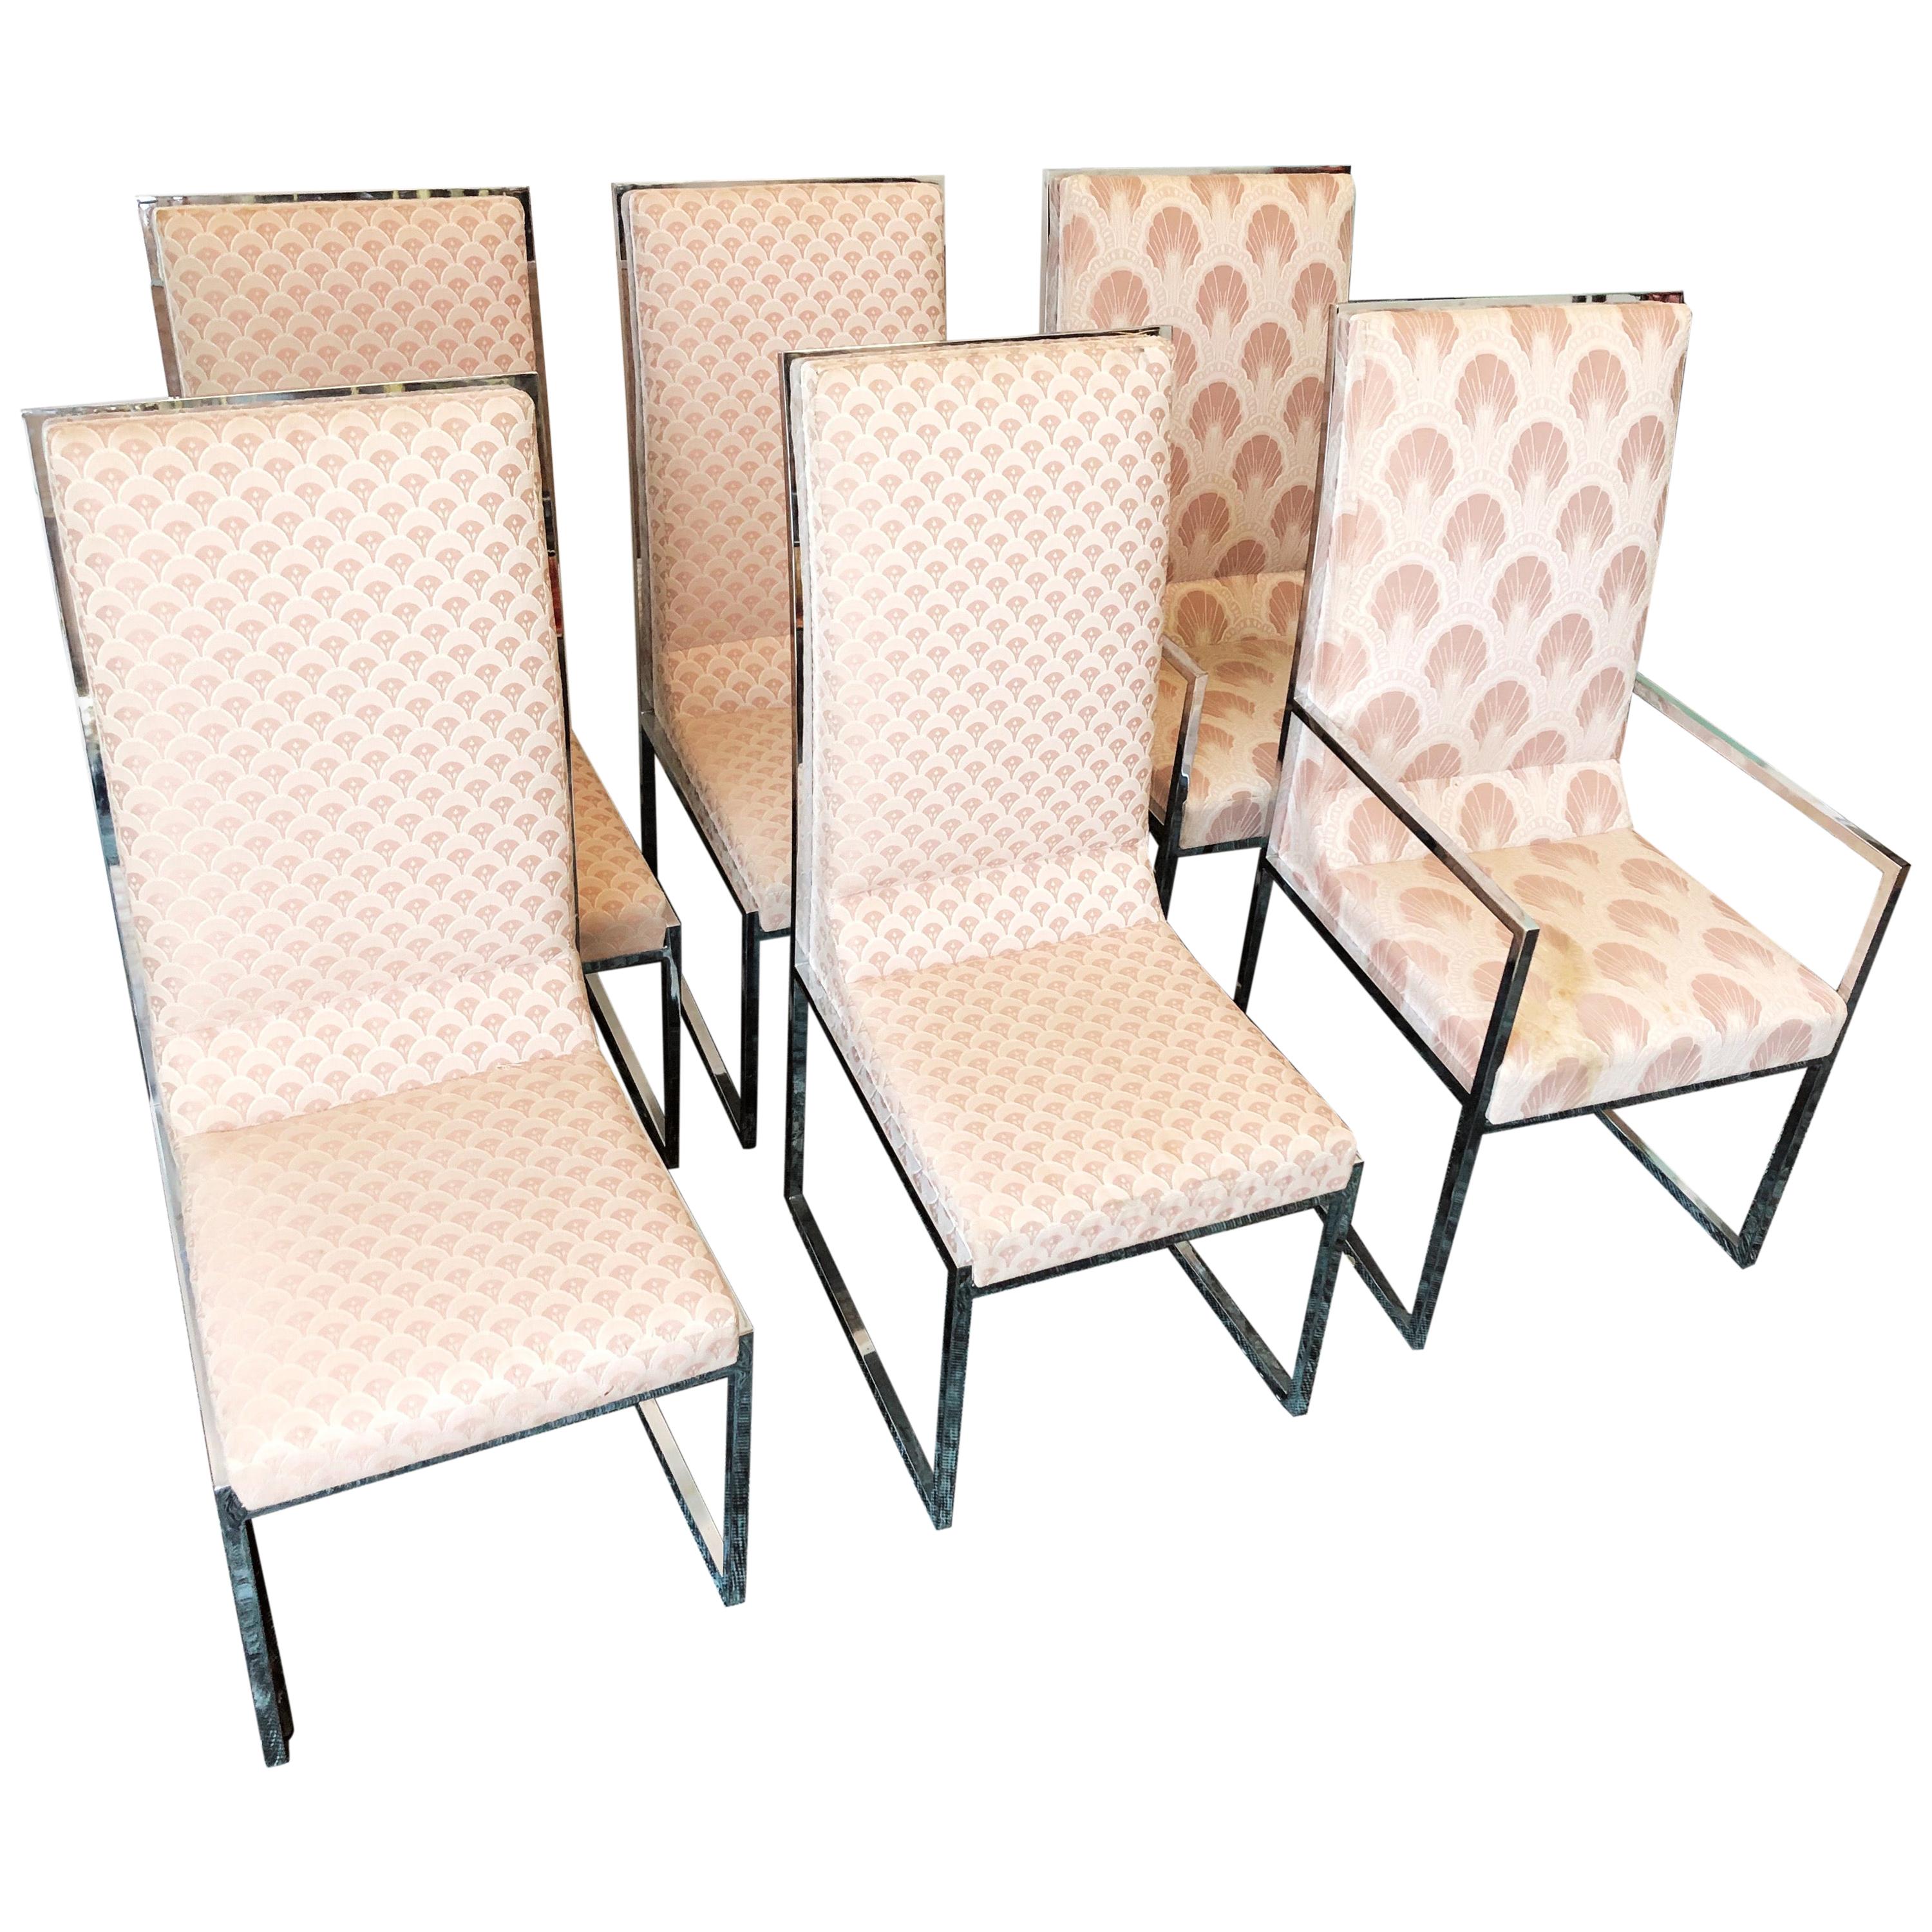 Vintage Set of Six Chrome Dining Chairs Attributed to Milo Baughman, circa 1970s